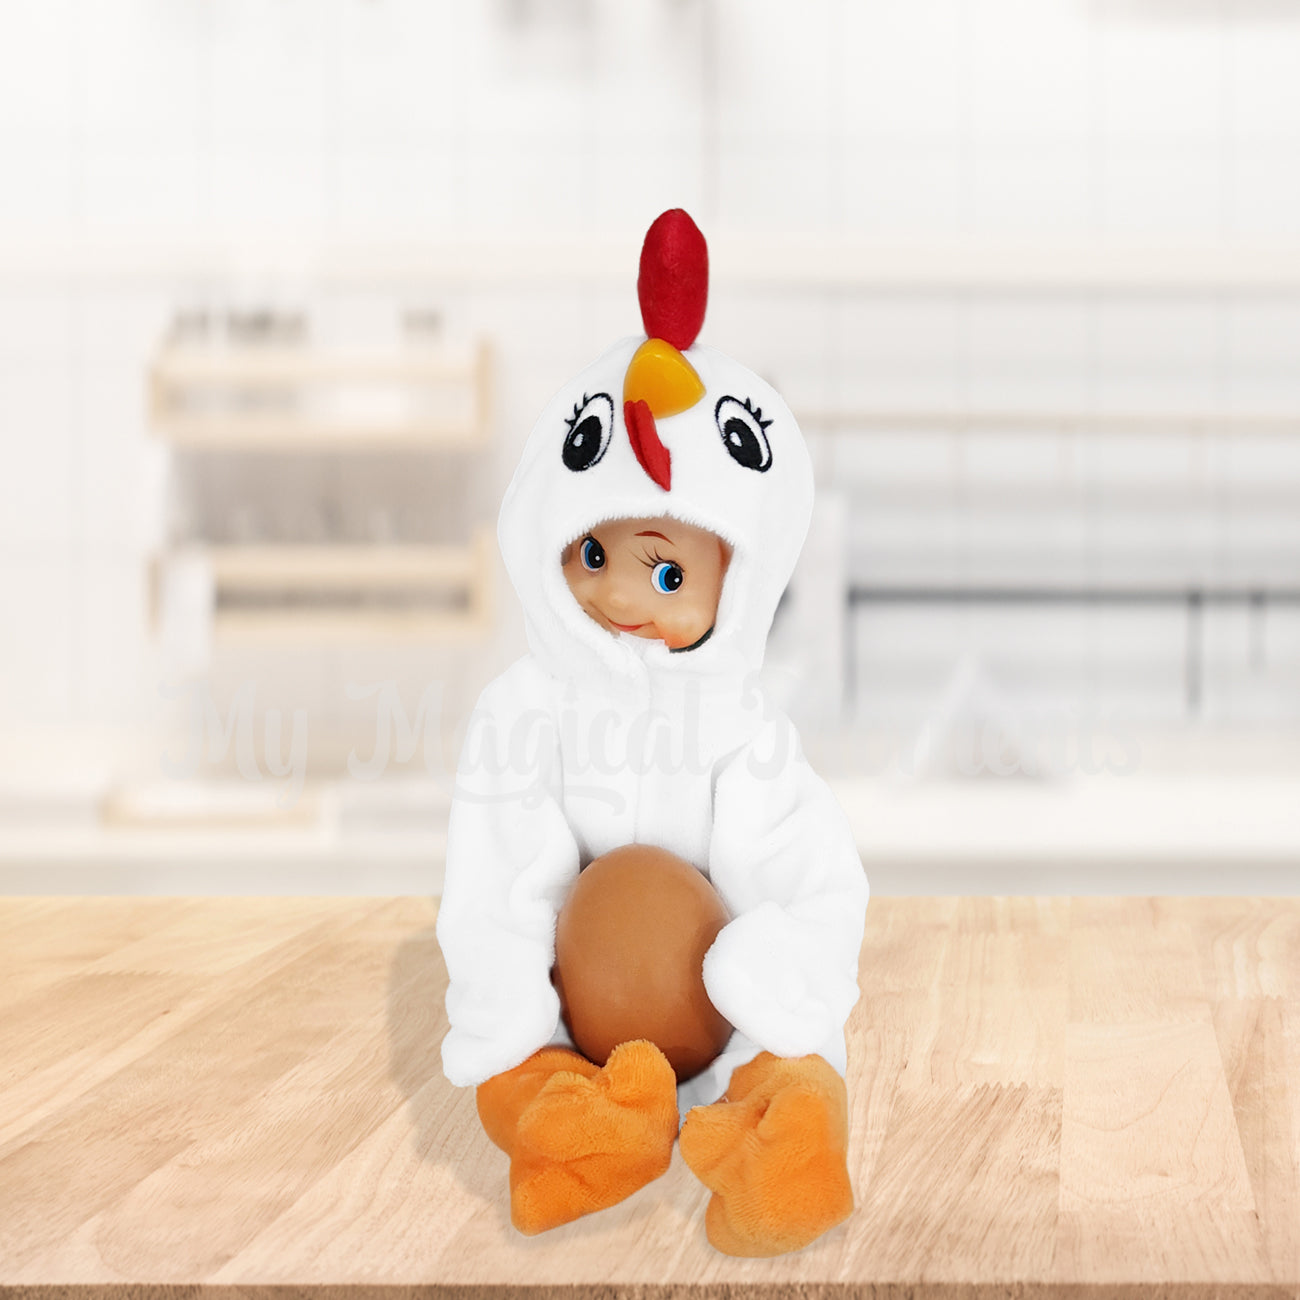 Elf dressed as a chicken holding an egg in the kitchen